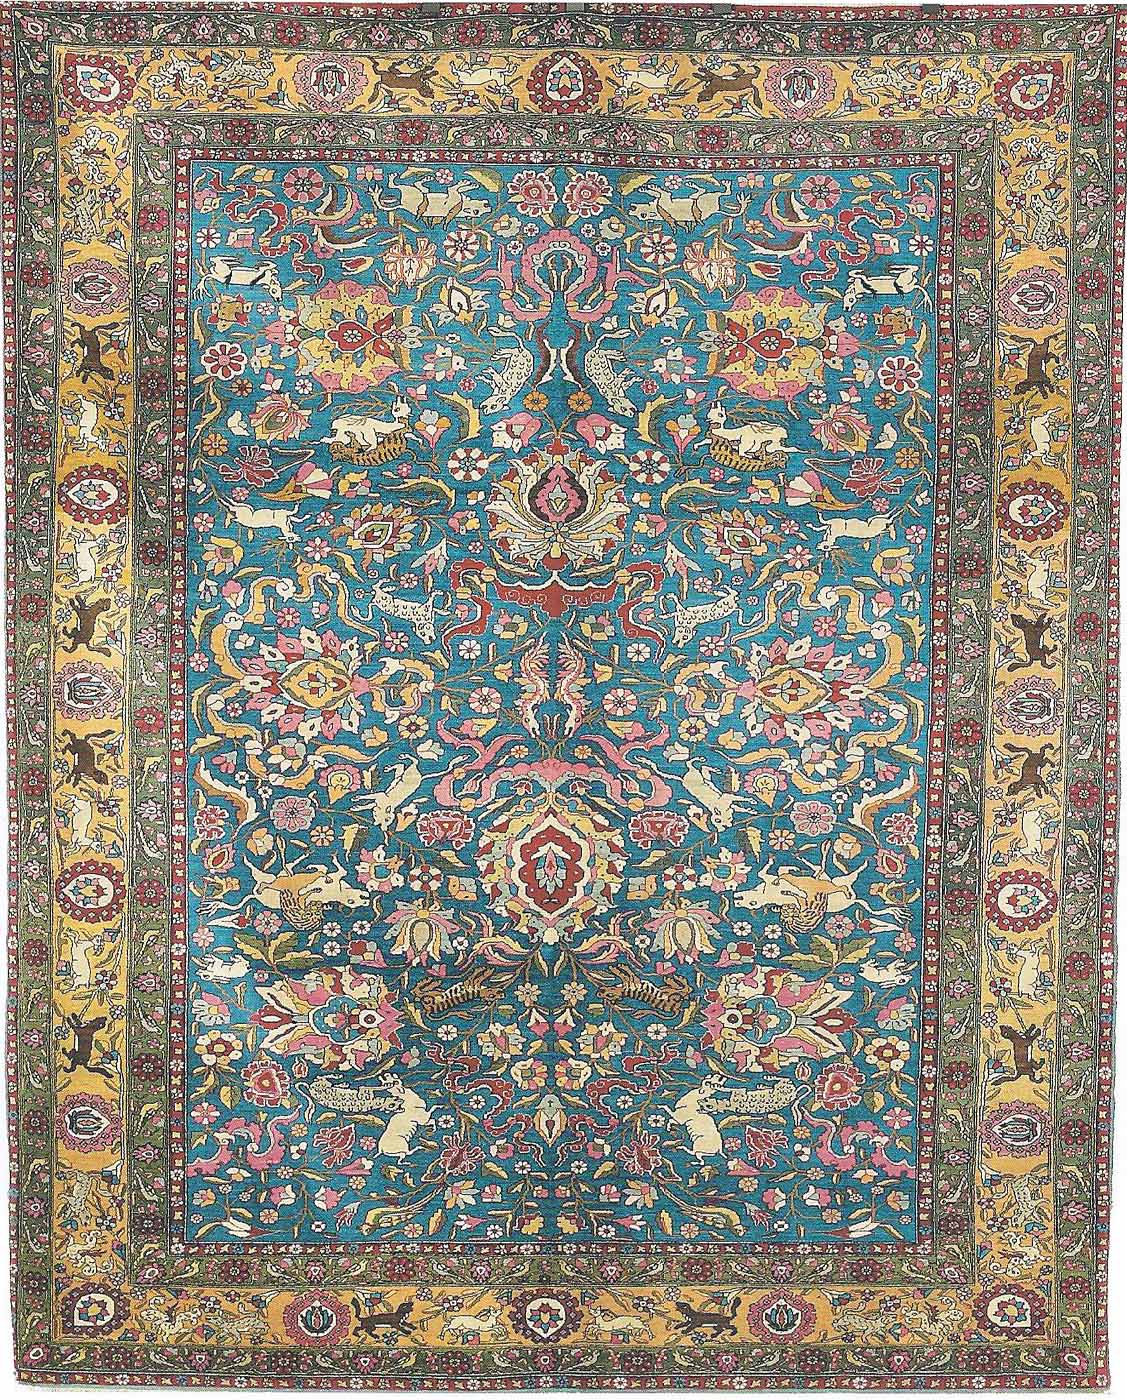 Oriental carpets Tehran carpets are very difficult to find and very expensive JMAUDRK